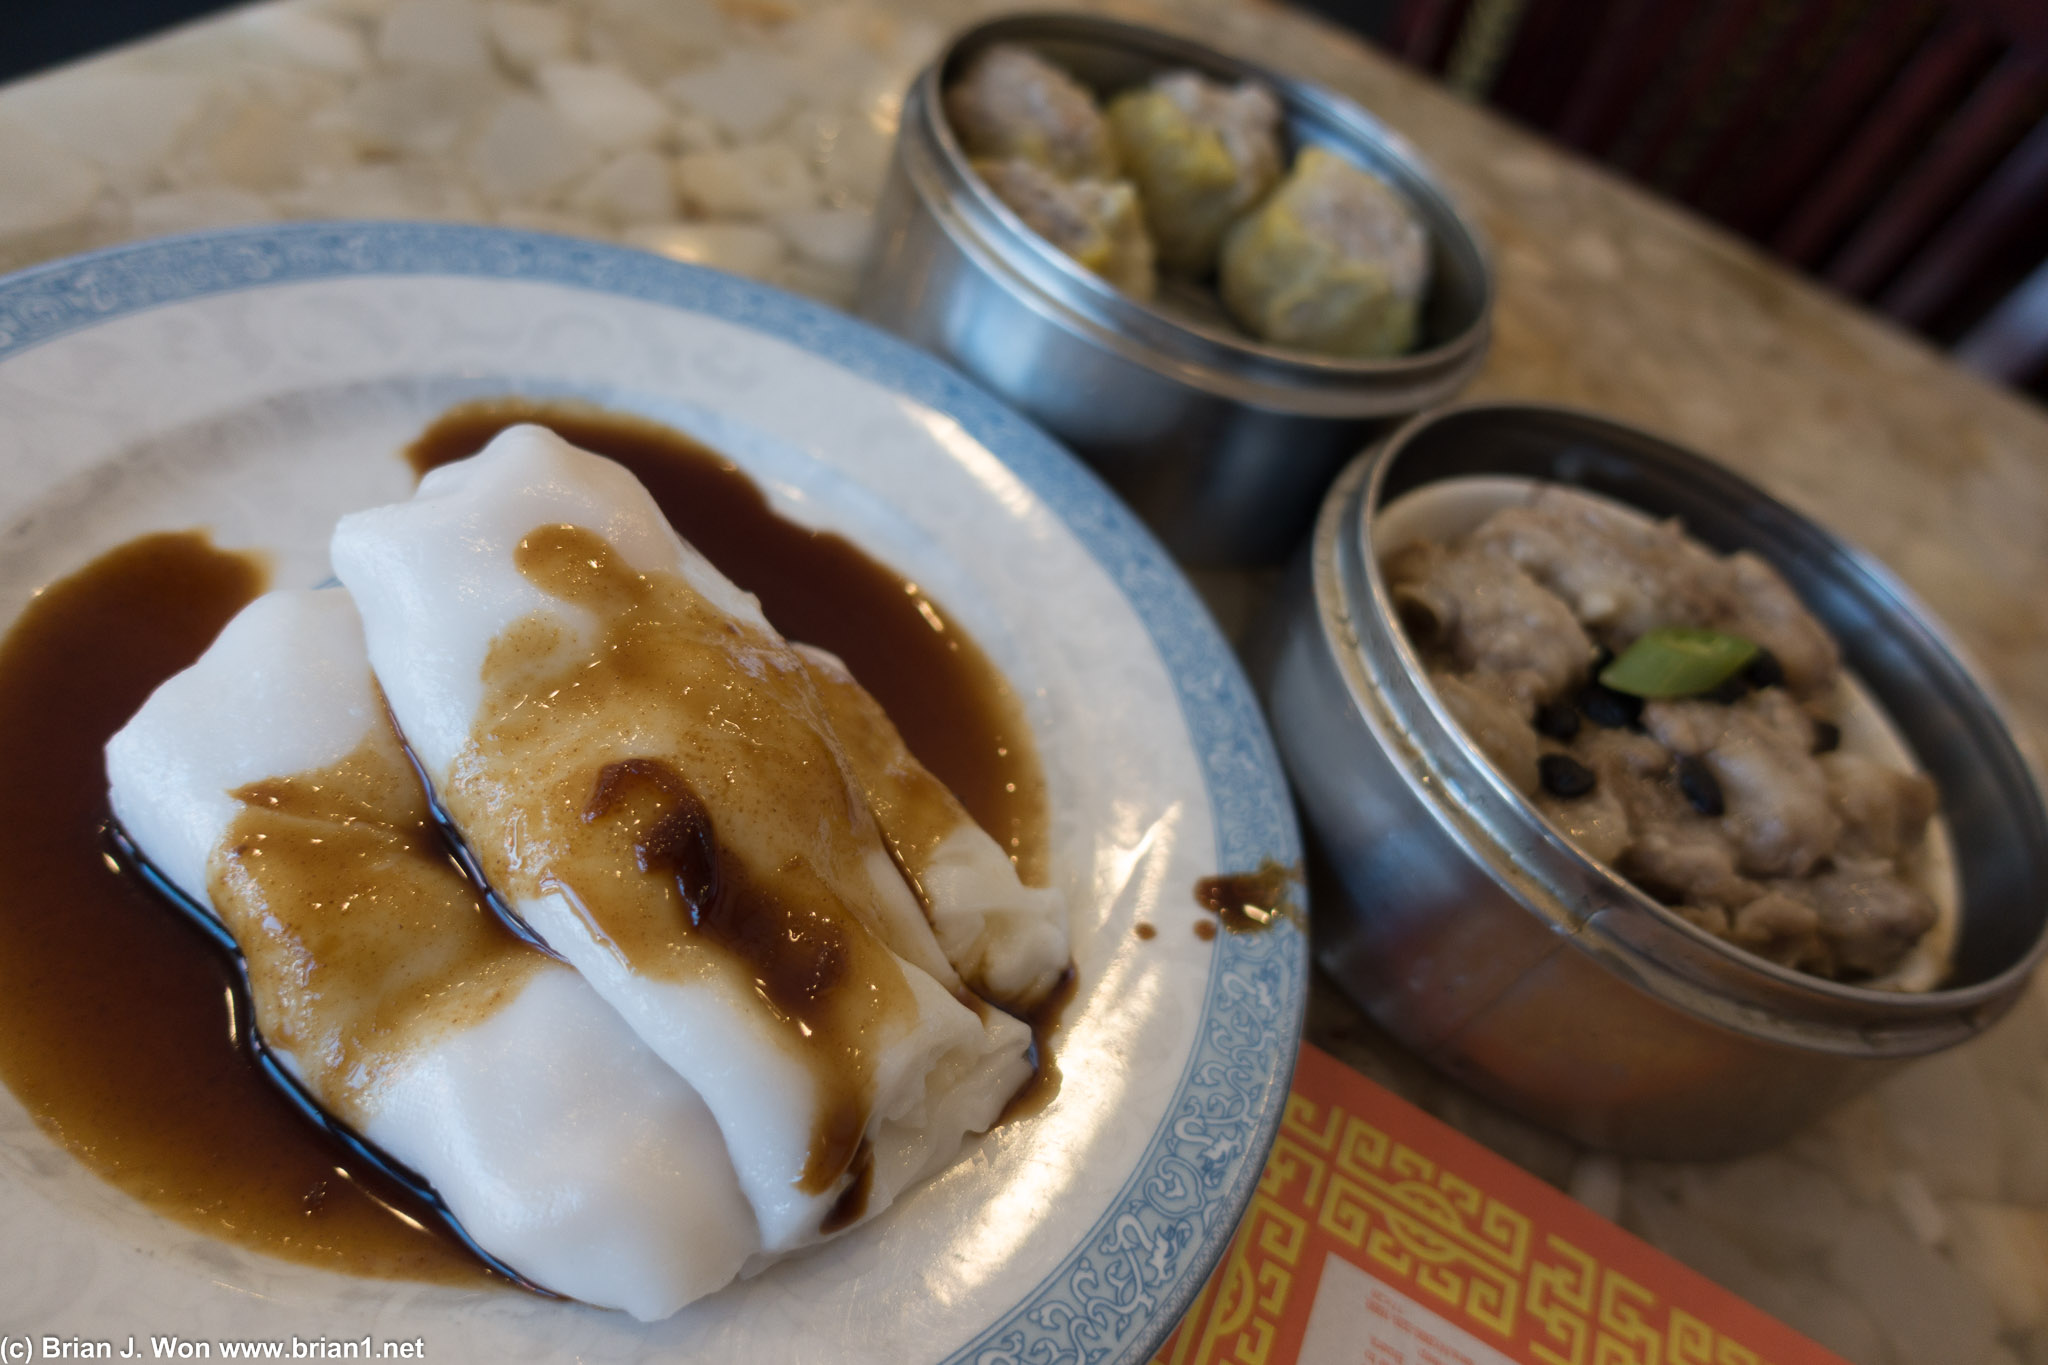 Presumably there's shrimp in the har cheung fun, even if you can't see it. And what the hell is the thick brown sauce?